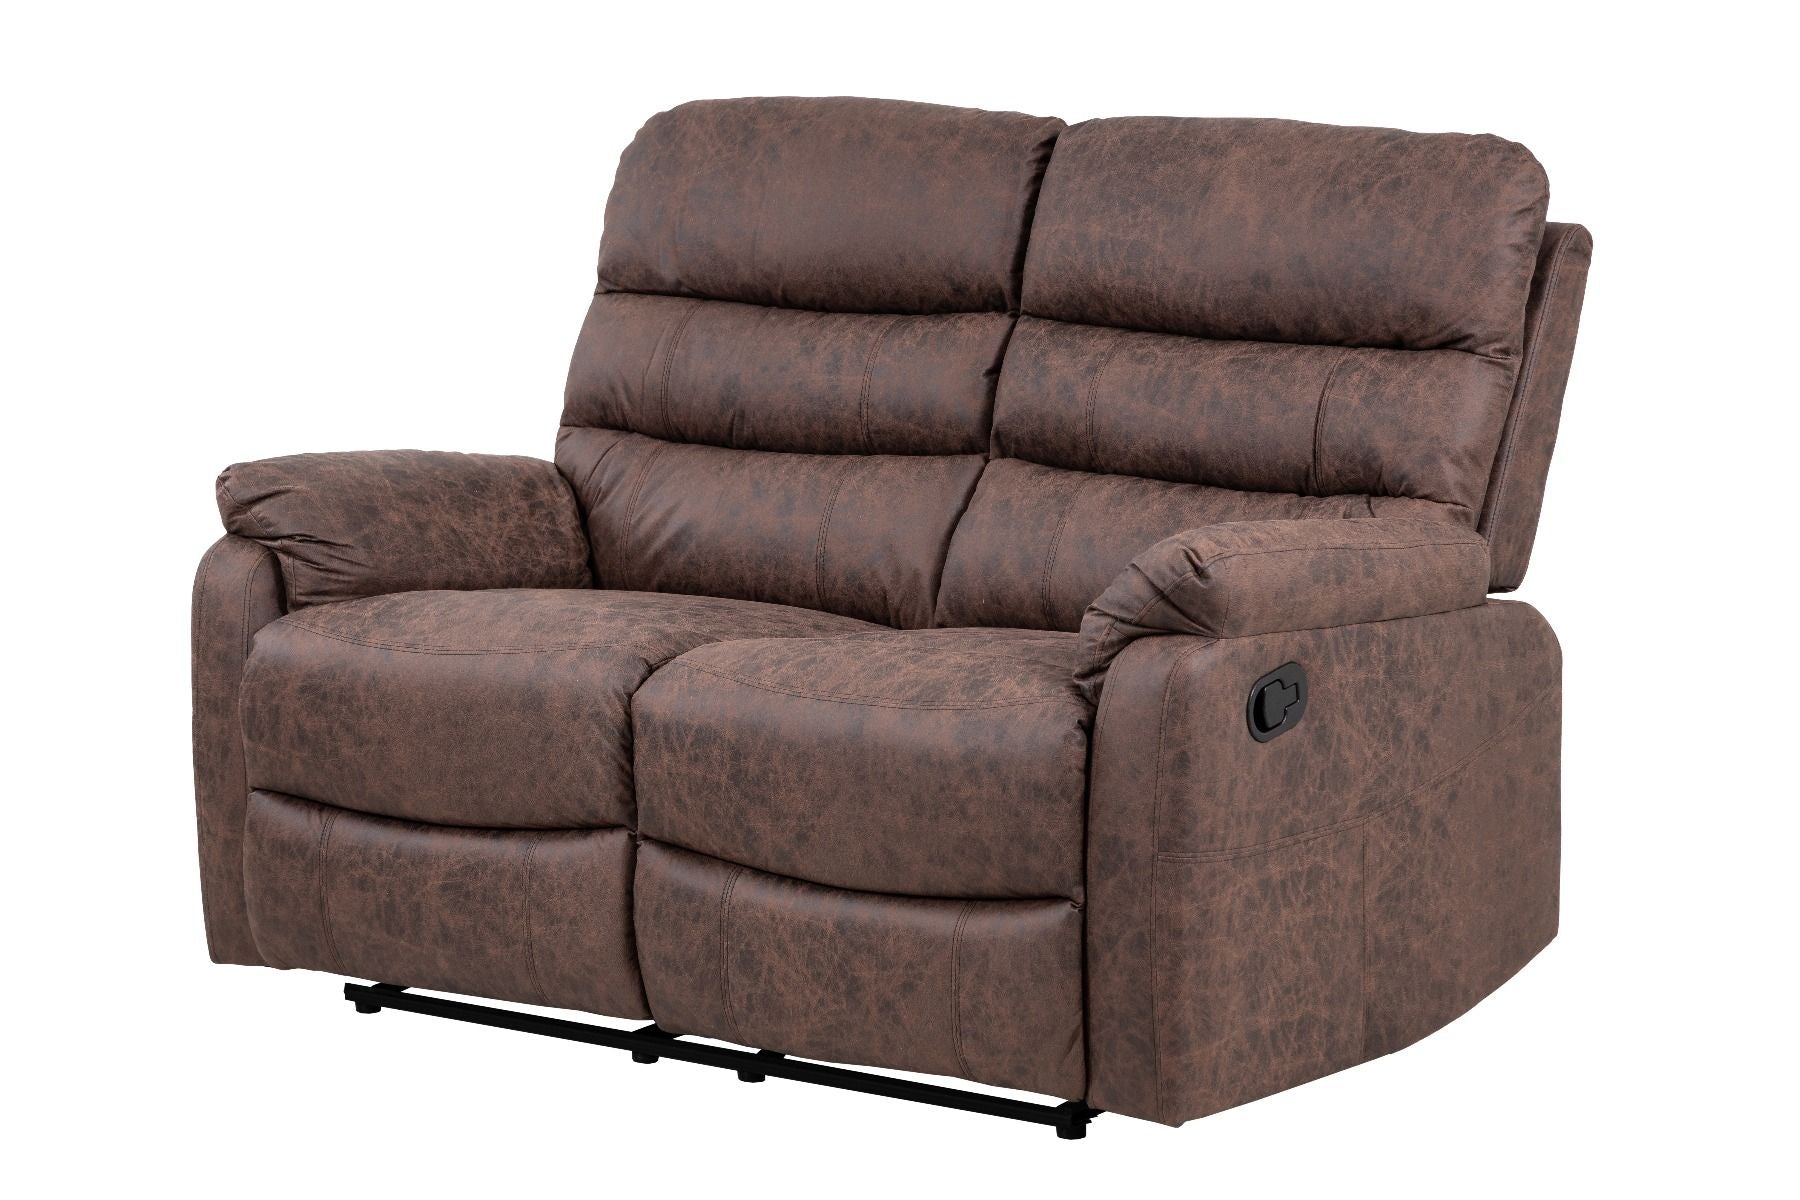 Taylor 2 Seater Recliner-Leather Air-Antique Brown Rub Off